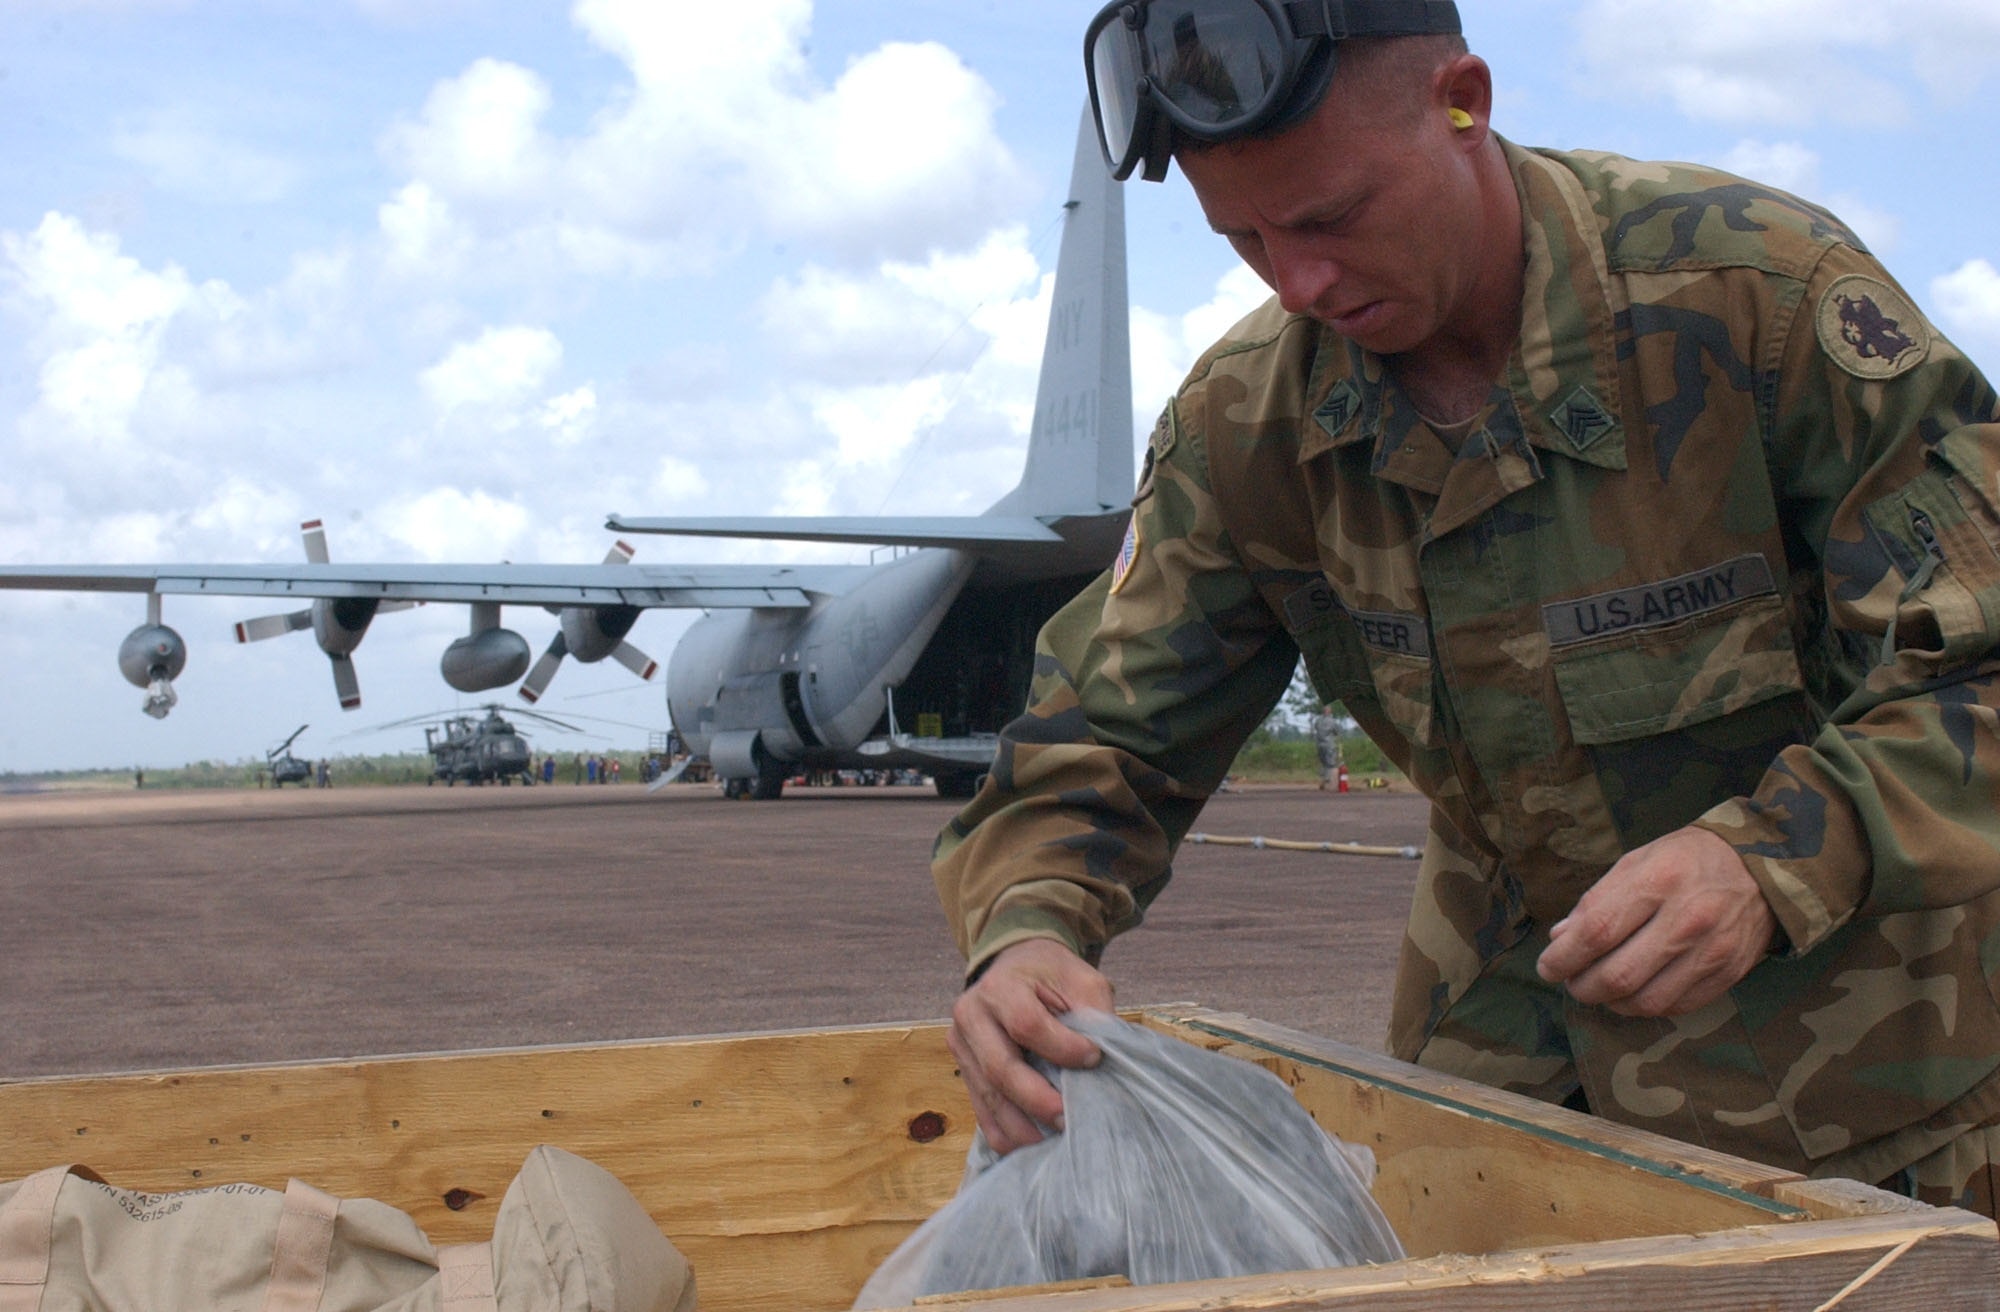 PUERTO CABEZAS, Nicaragua – Army Sgt. Robert Schaffer, 1st Battalion, 228th Aviation Regiment at Soto Cano Air Base, Honduras, retrieves supplies from a bin near a U.S. Marine Corps KC-130 assigned to the Marine Aerial Refueler Transport Squadron 452 (VMGR-452) here Sept. 15.  Sergeant Schaffer assisted with the setup of an Advanced Aviation Forward Area Refueling System to refuel aircraft supporting relief missions following Hurricane Felix. (U.S. Air Force photo by Tech. Sgt. Sonny Cohrs)